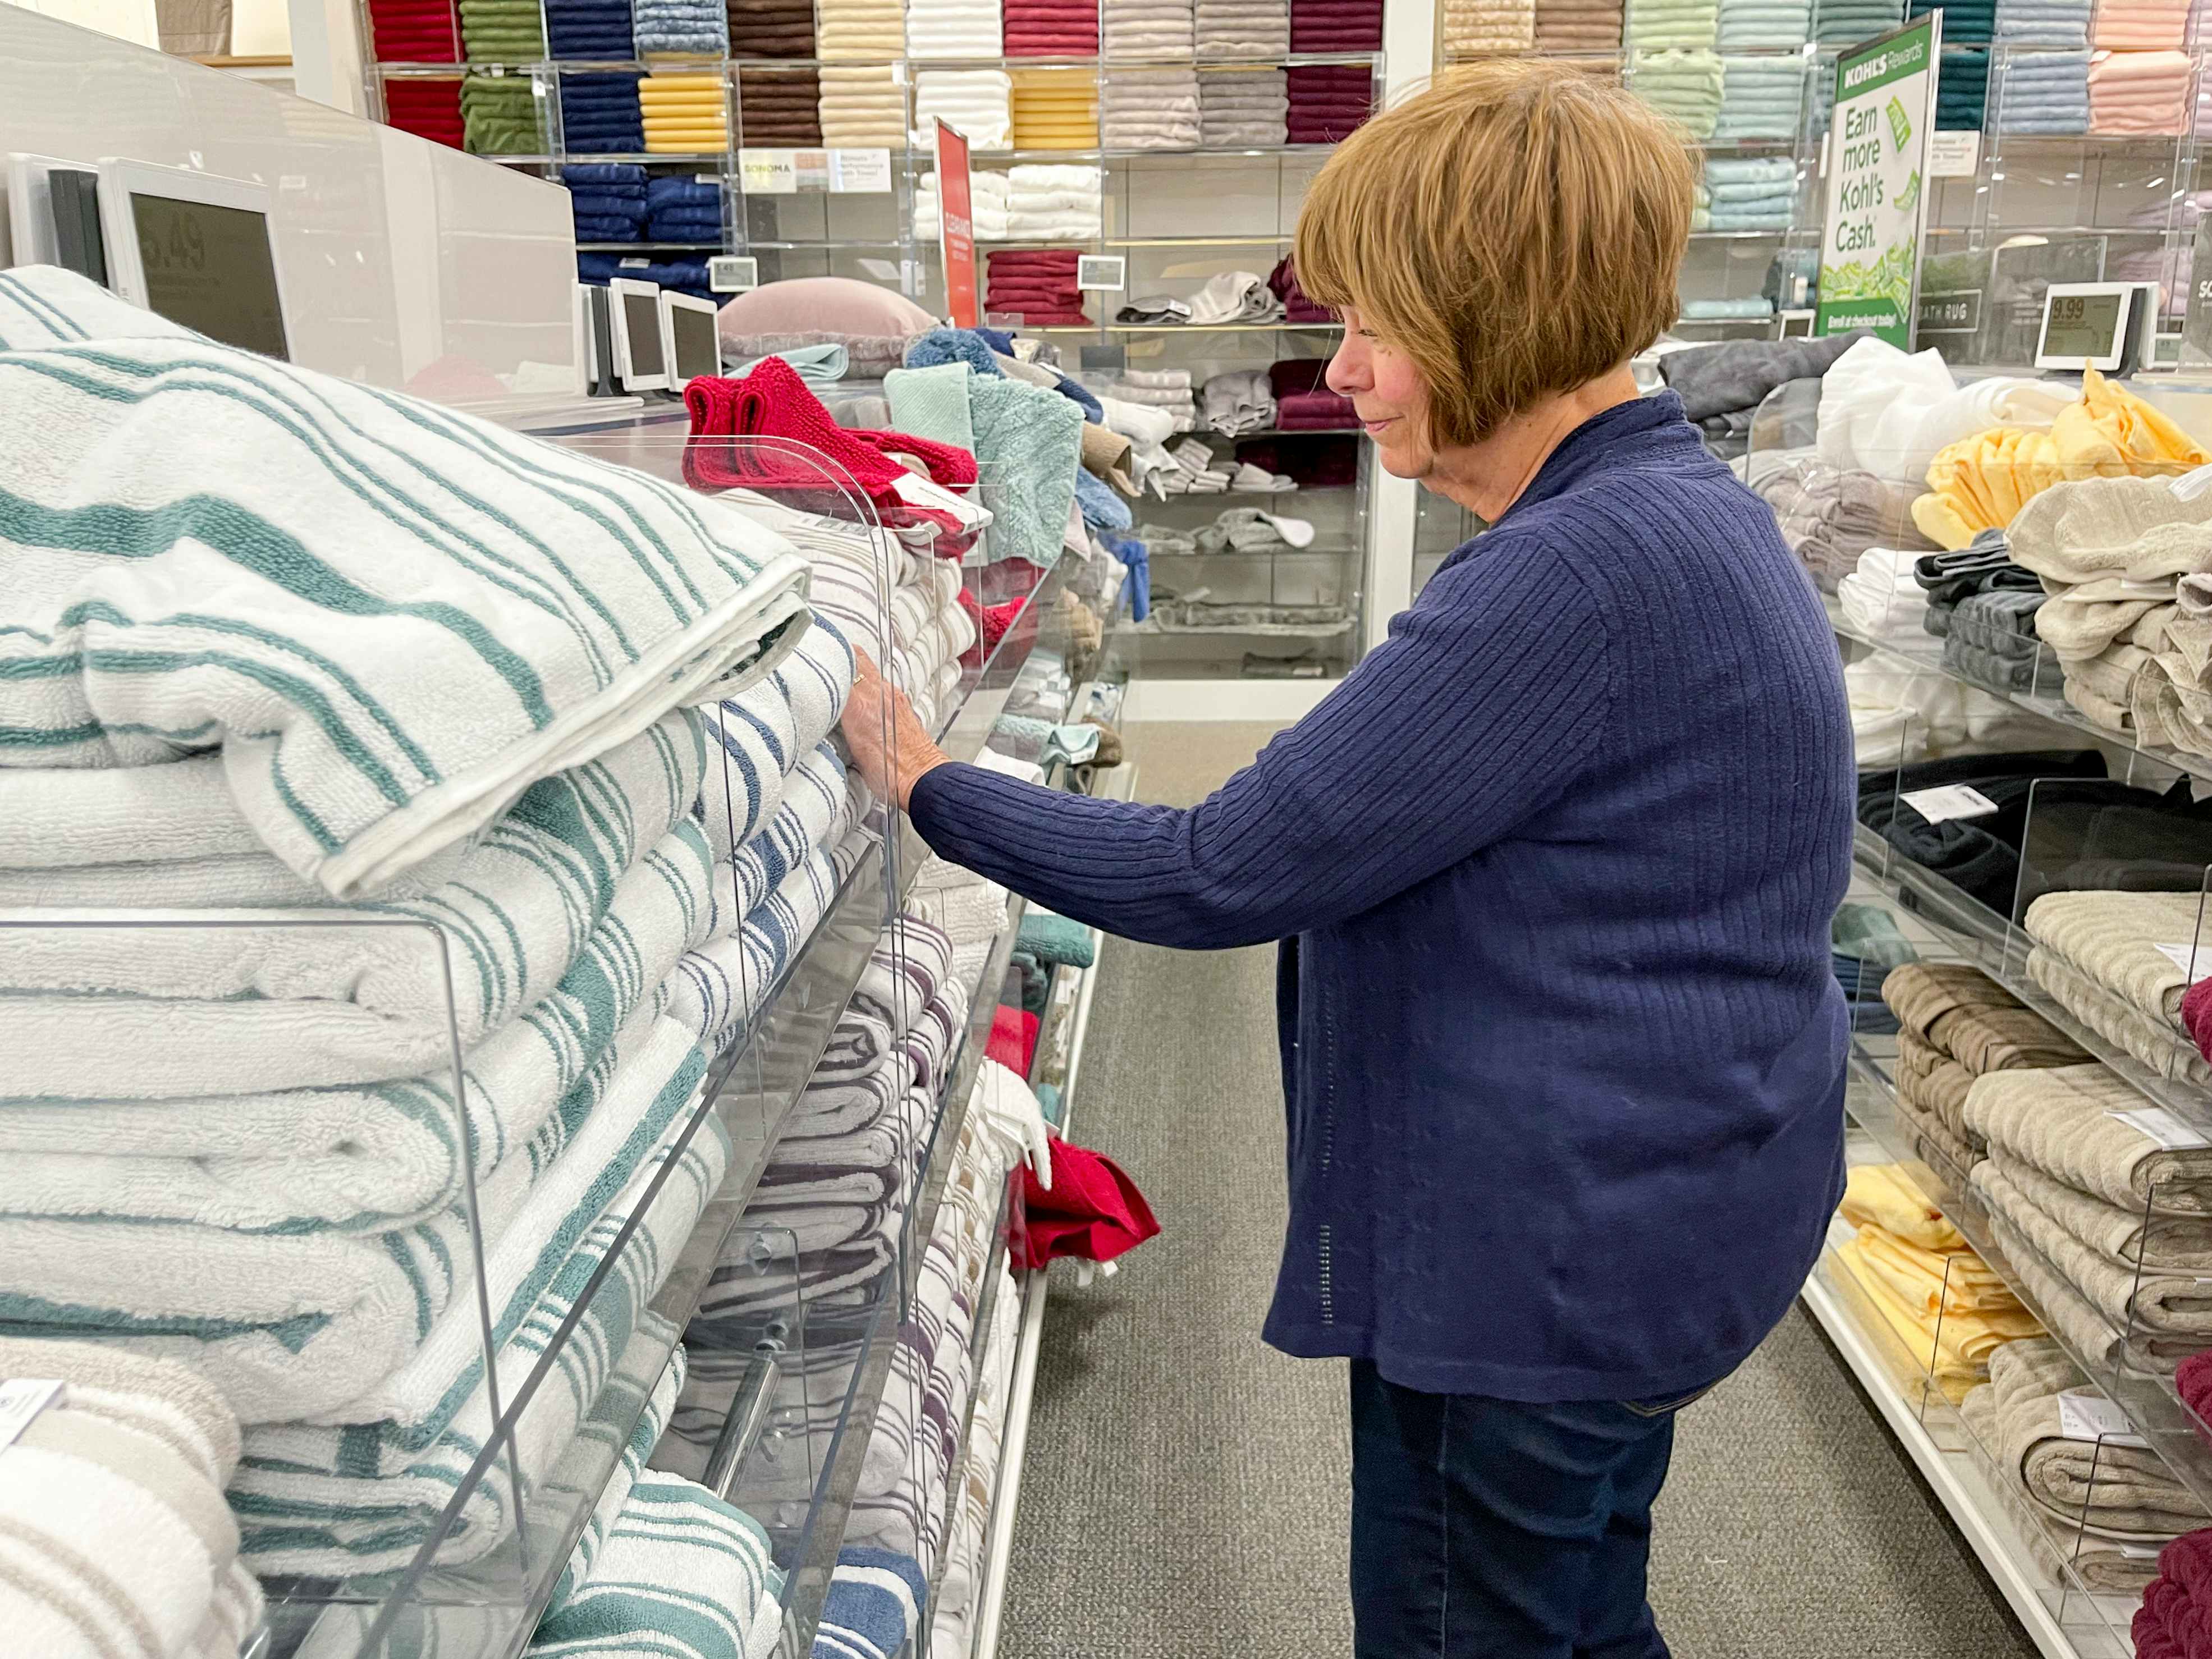 A woman shopping for towels at Kohl's